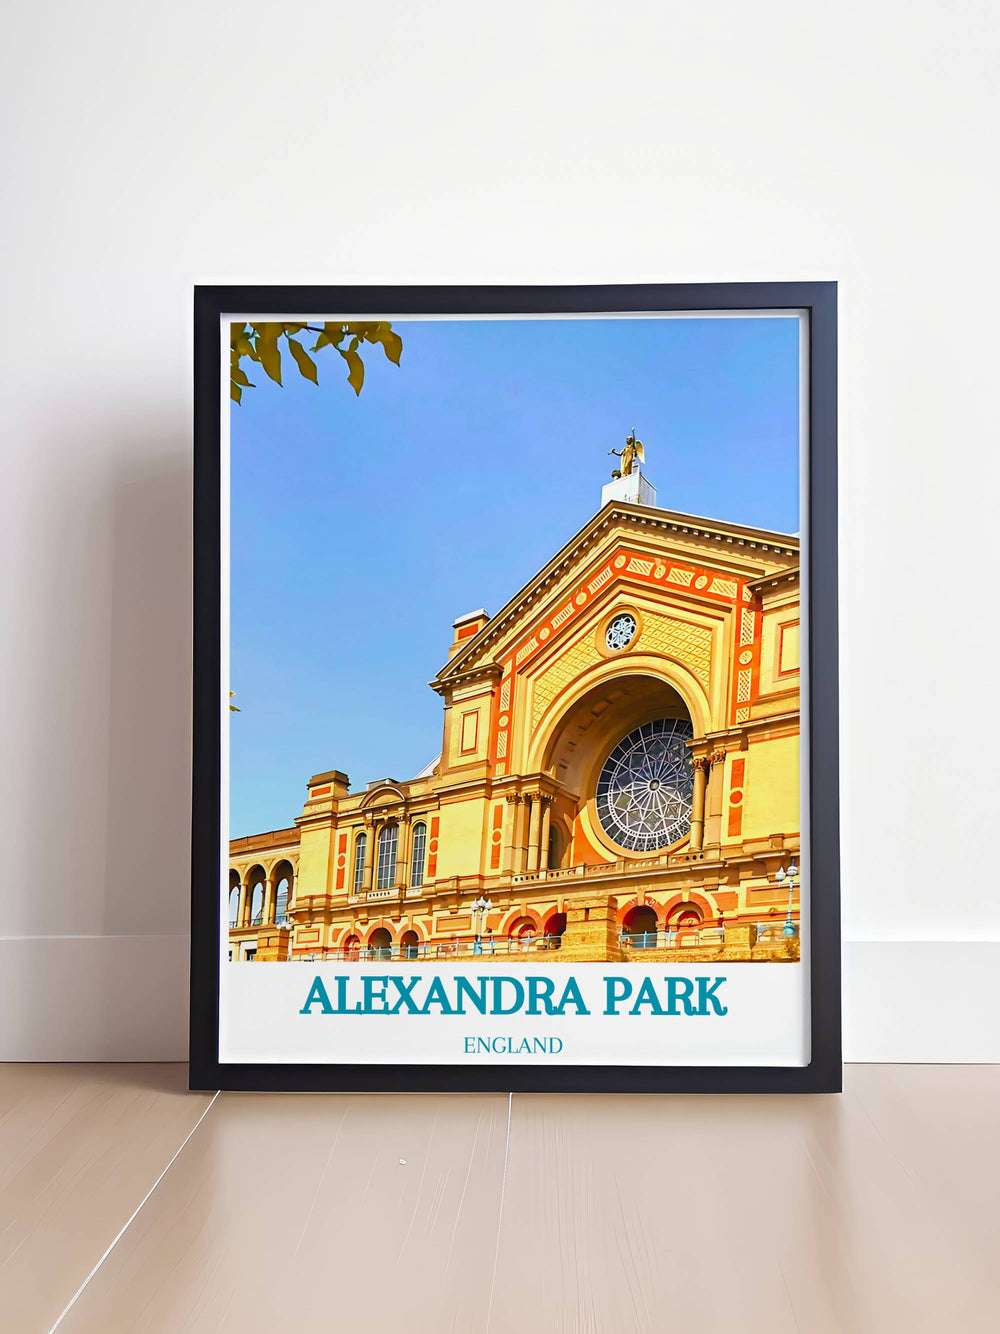 Framed print of London's Hampstead Heath, a picturesque representation of one of the city's most beloved parks.